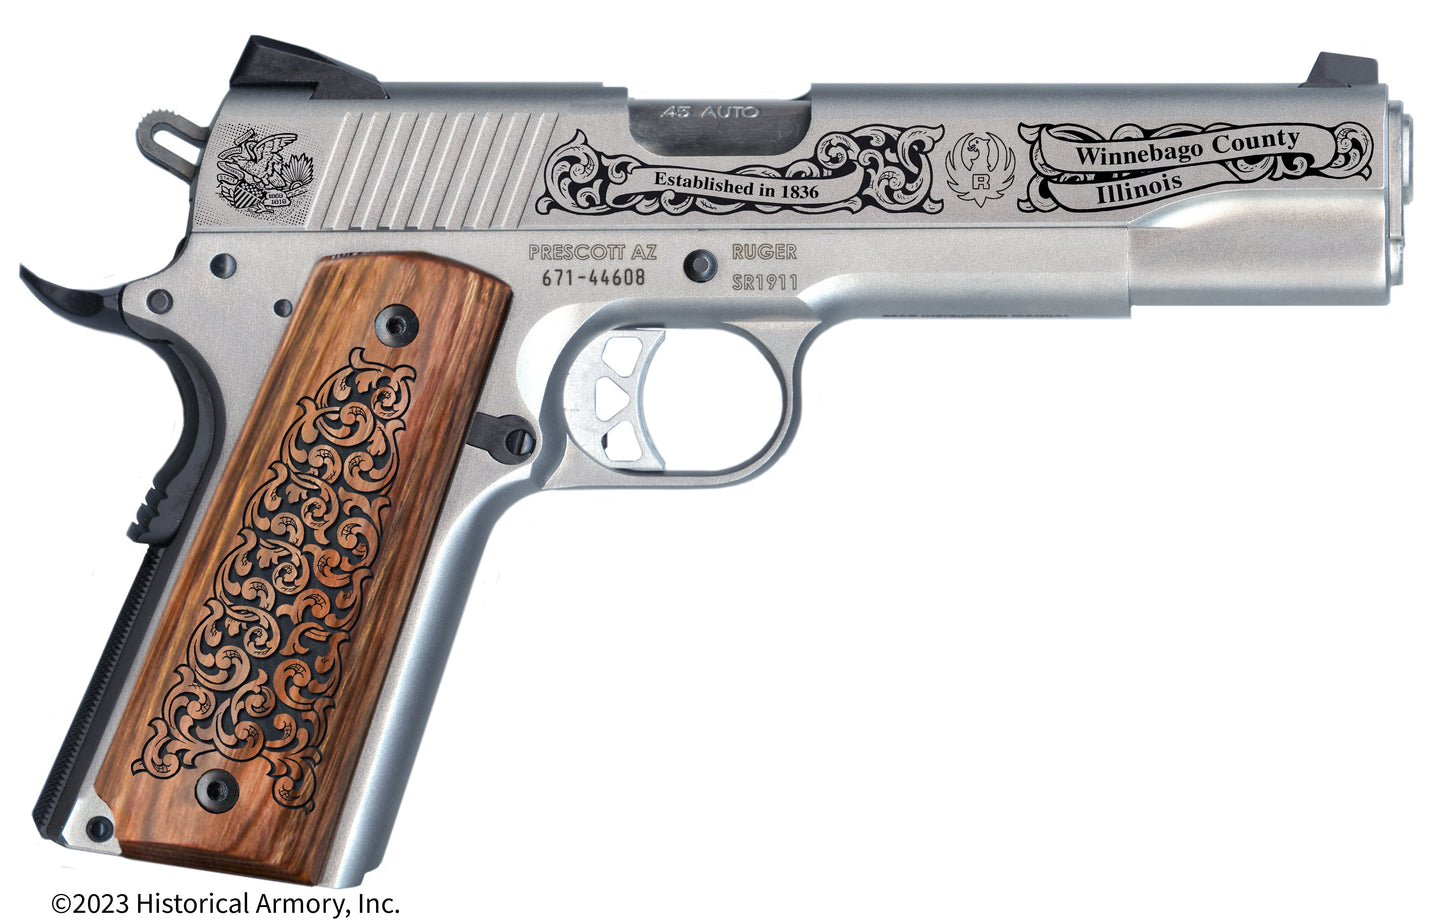 Winnebago County Illinois Engraved .45 Auto Ruger 1911